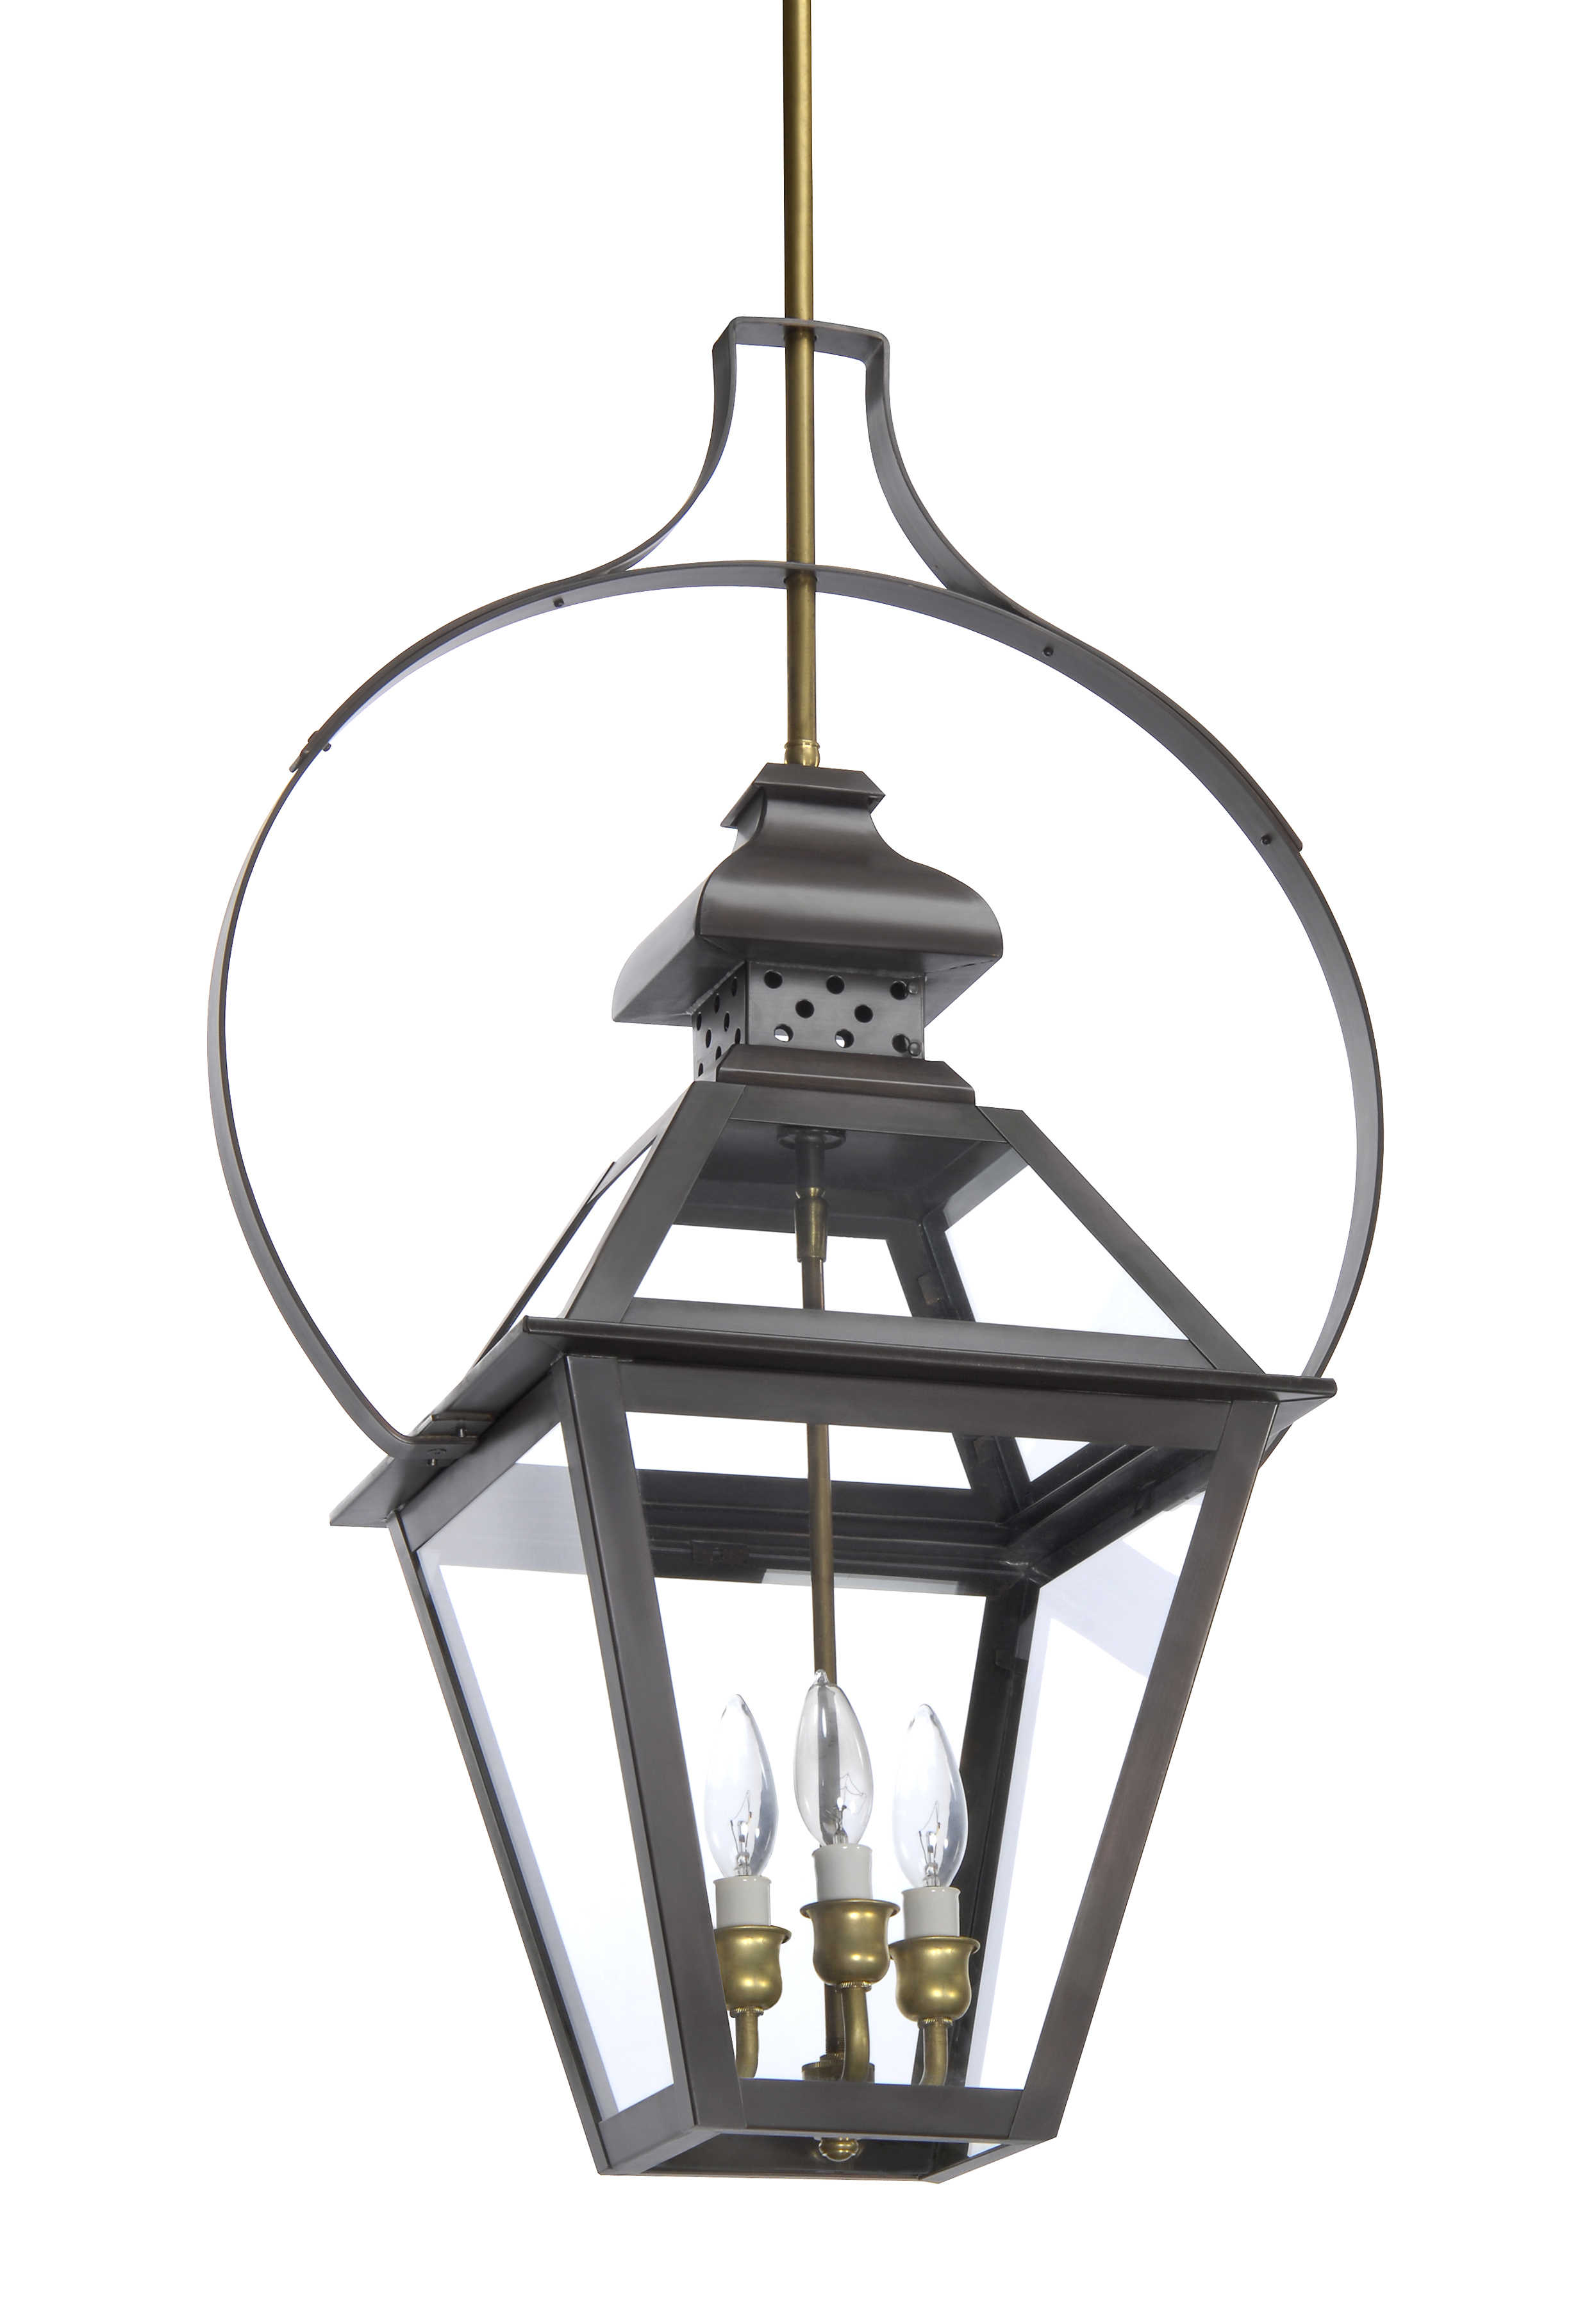 T-33 - hanging light, copper lantern, gas and electric lighting